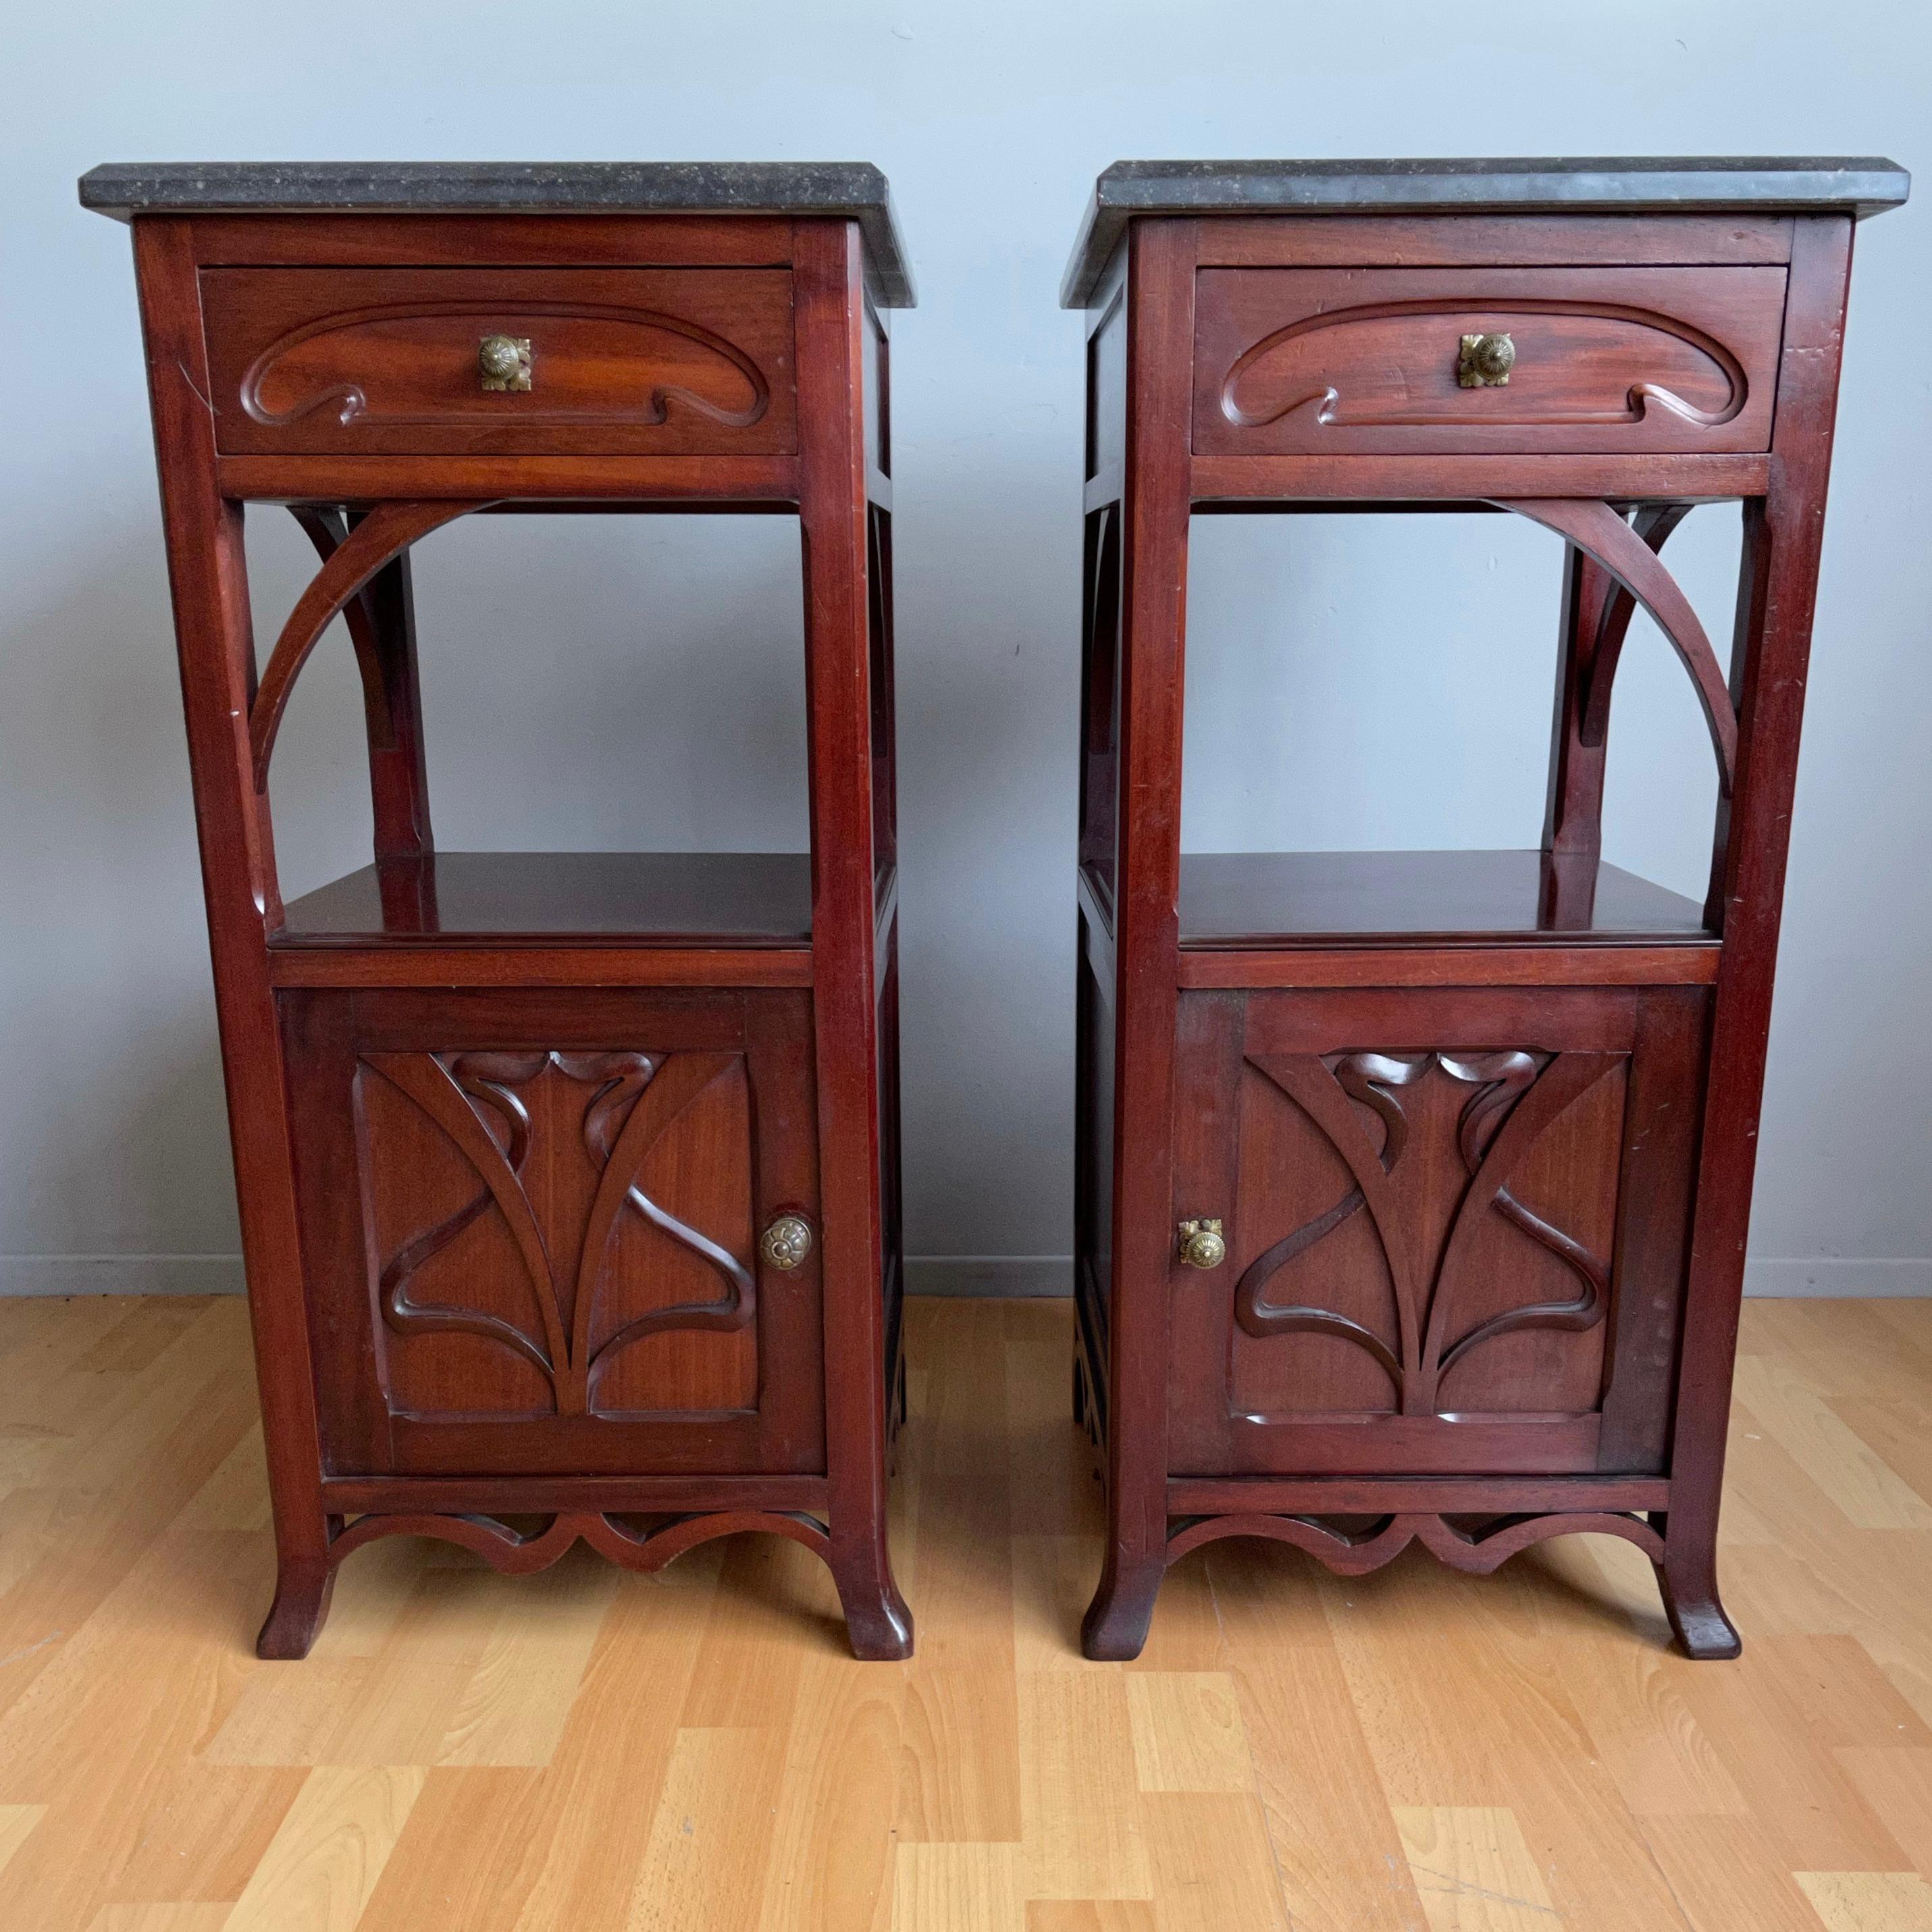 Beautiful style and good condition pair of half-open nightstands with anthracite color marble tops. 

If you are looking for aesthetically pleasing and practical to use bedside cabinets to grace your bedroom then this stylish pair could be ideal.